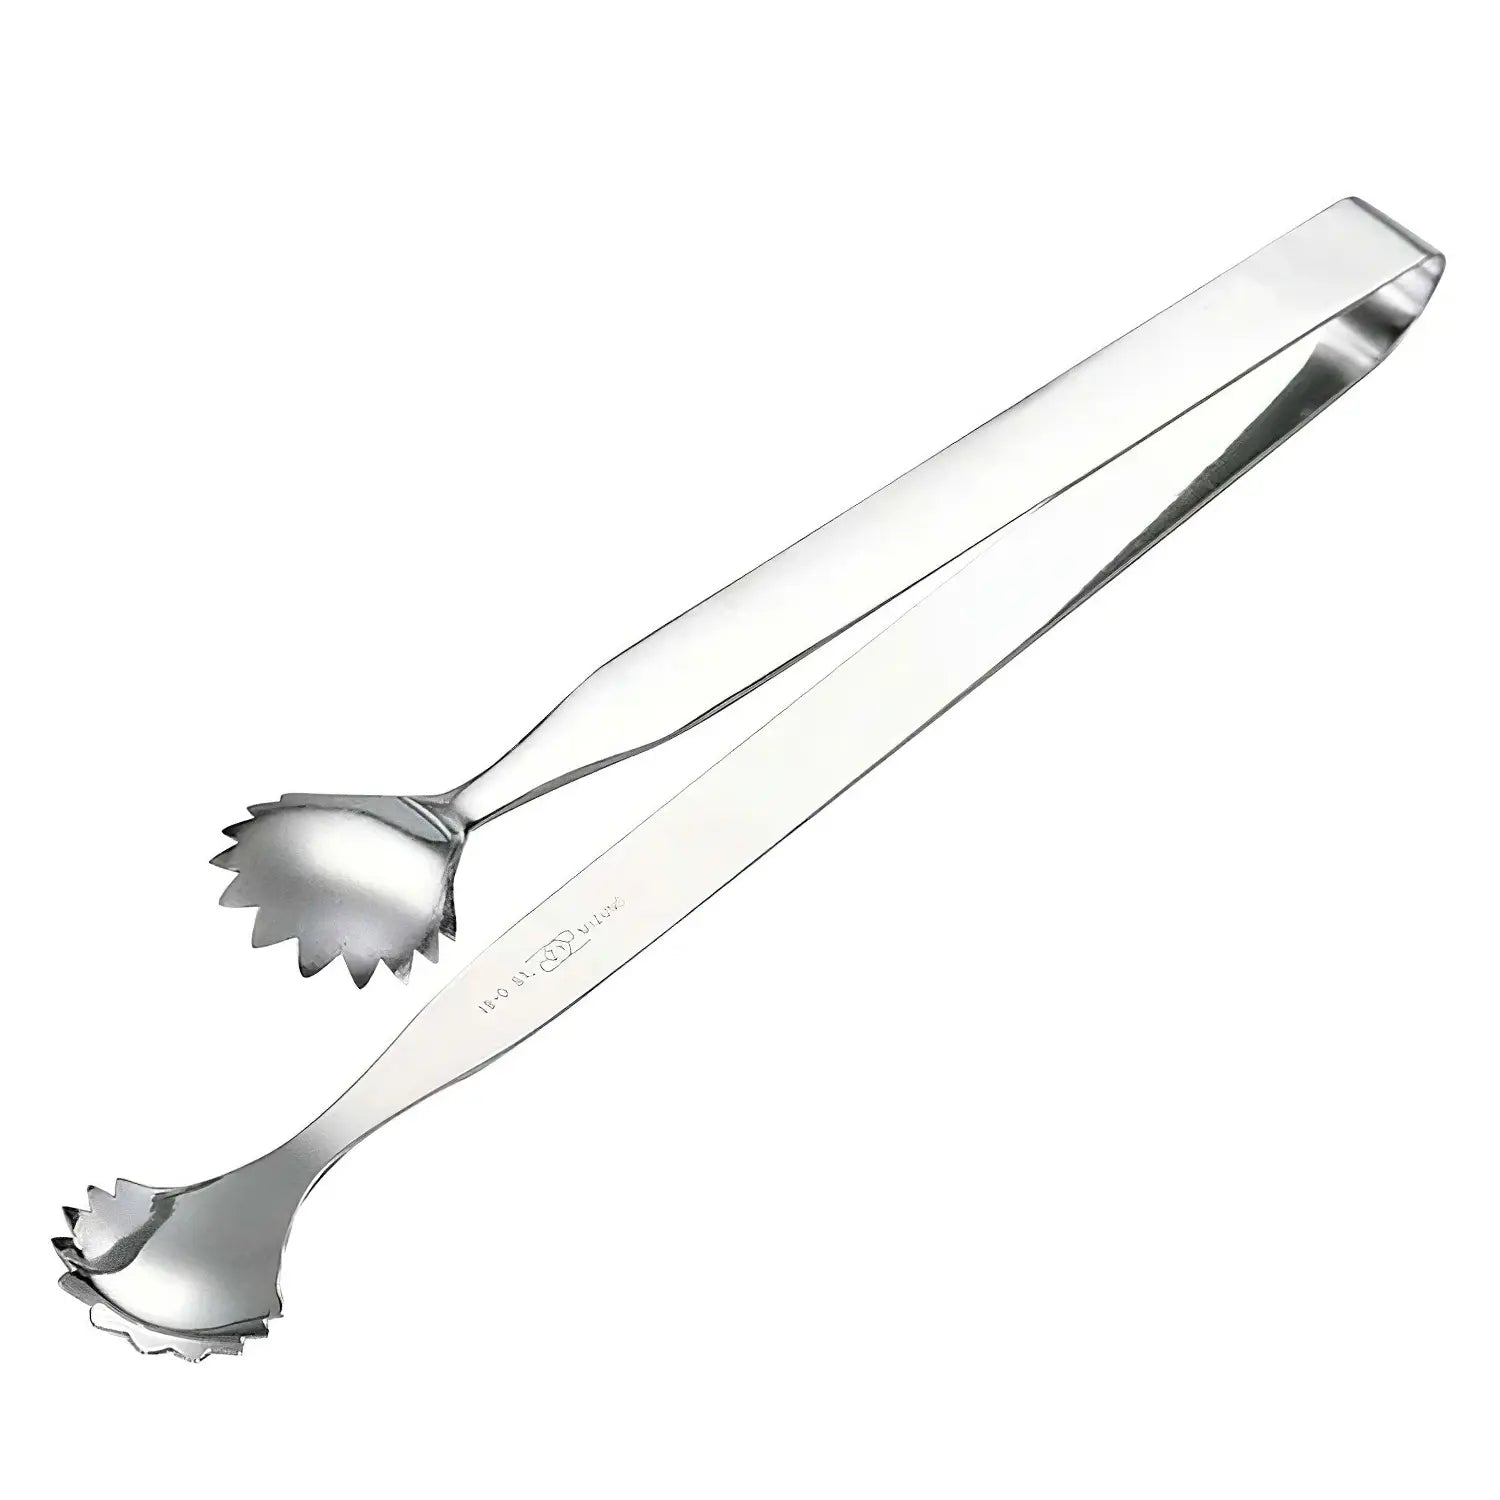 https://cdn.shopify.com/s/files/1/1610/3863/products/EBMStainlessSteelMeatTongs158412_1_1600x.webp?v=1660871509